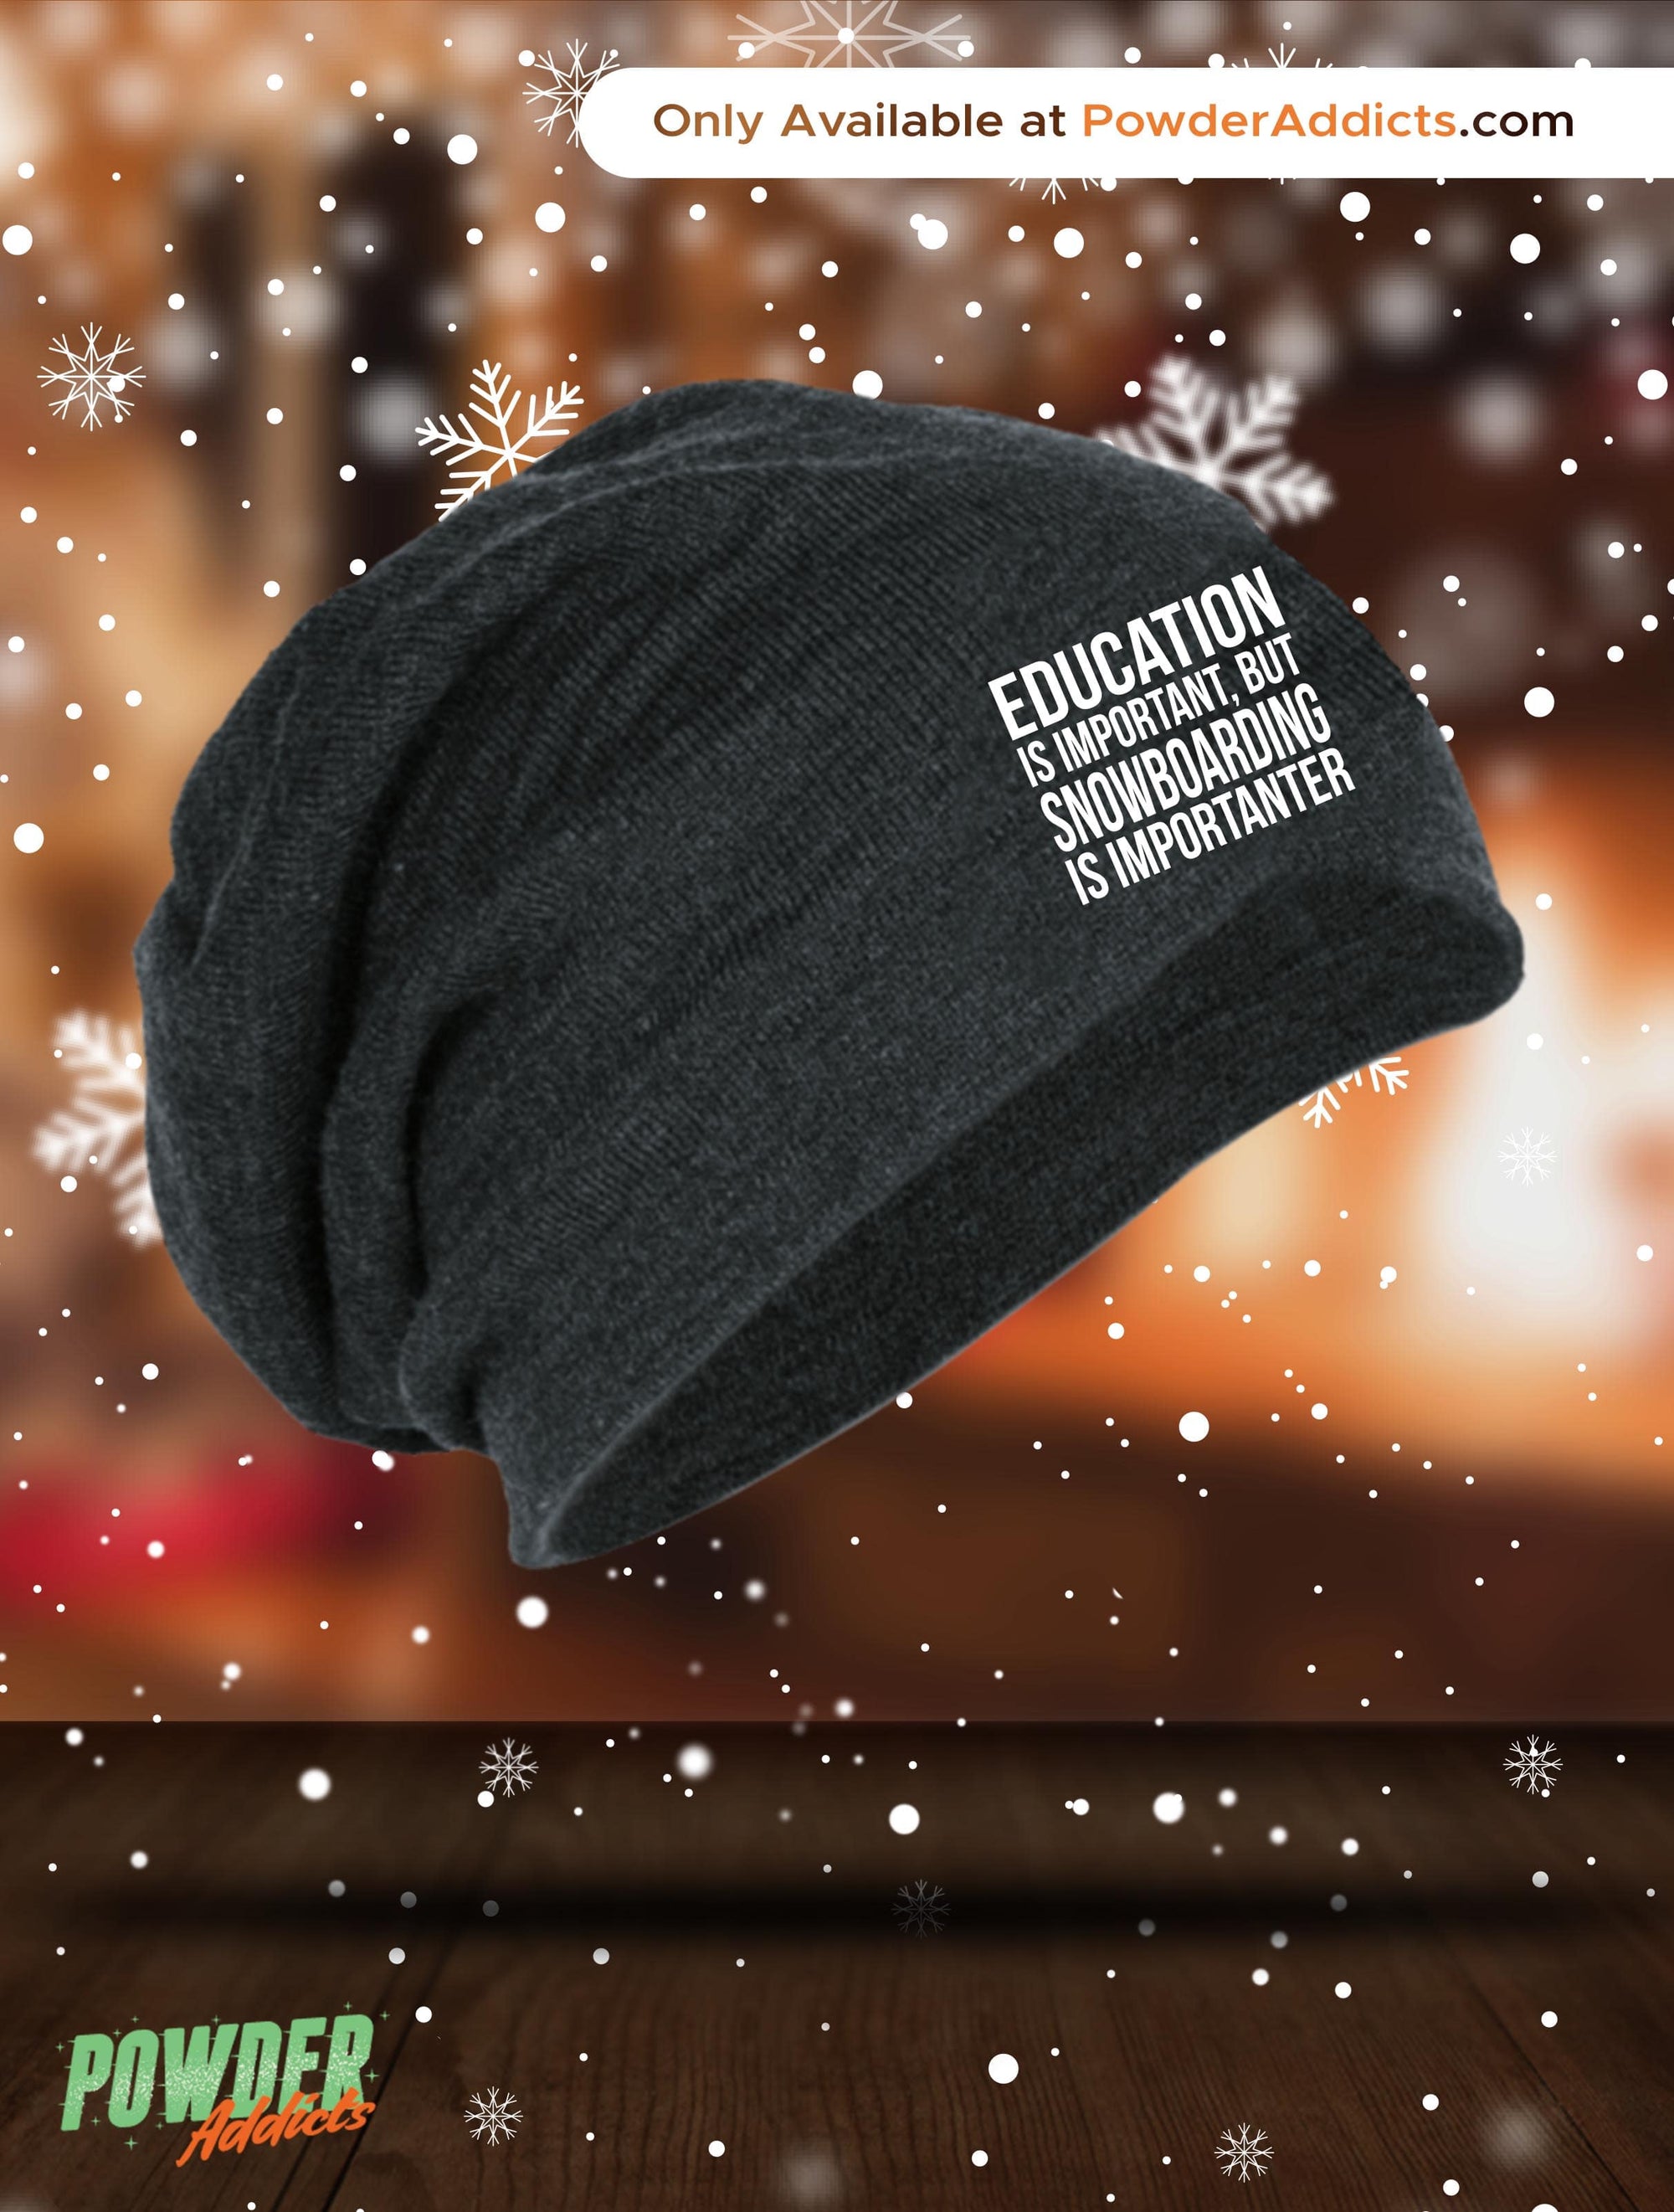 Education is Important but Snowboarding is Importanter Slouch Beanie - Powderaddicts